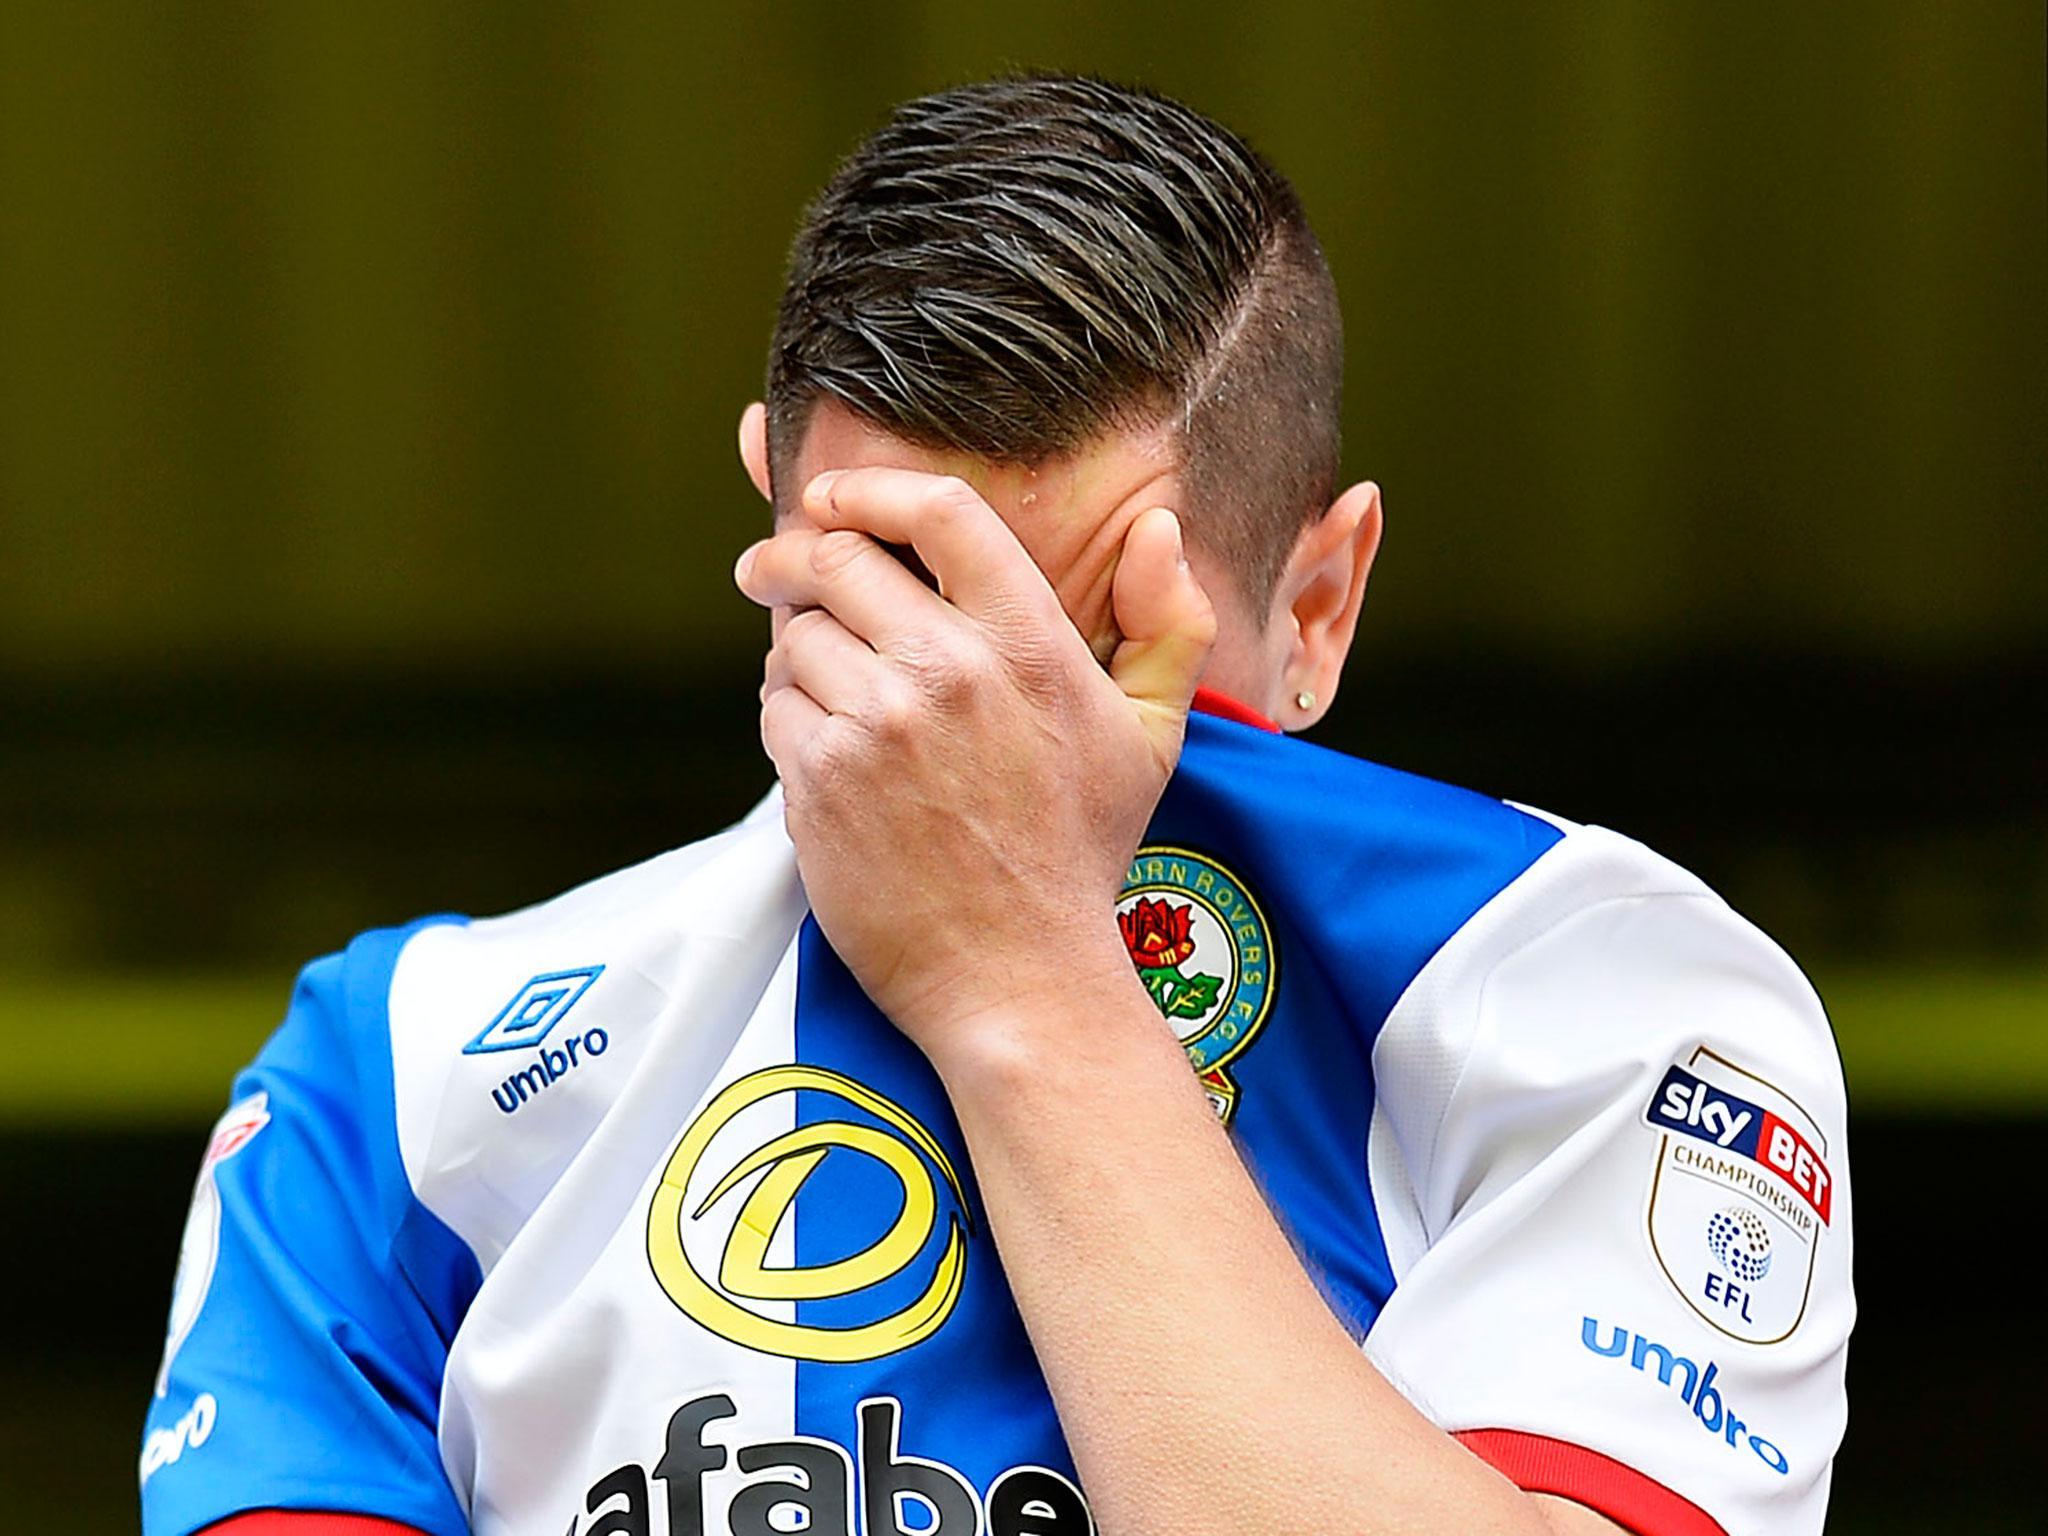 Blackburn were relegated to the third tier for the first time since 1980 on Sunday